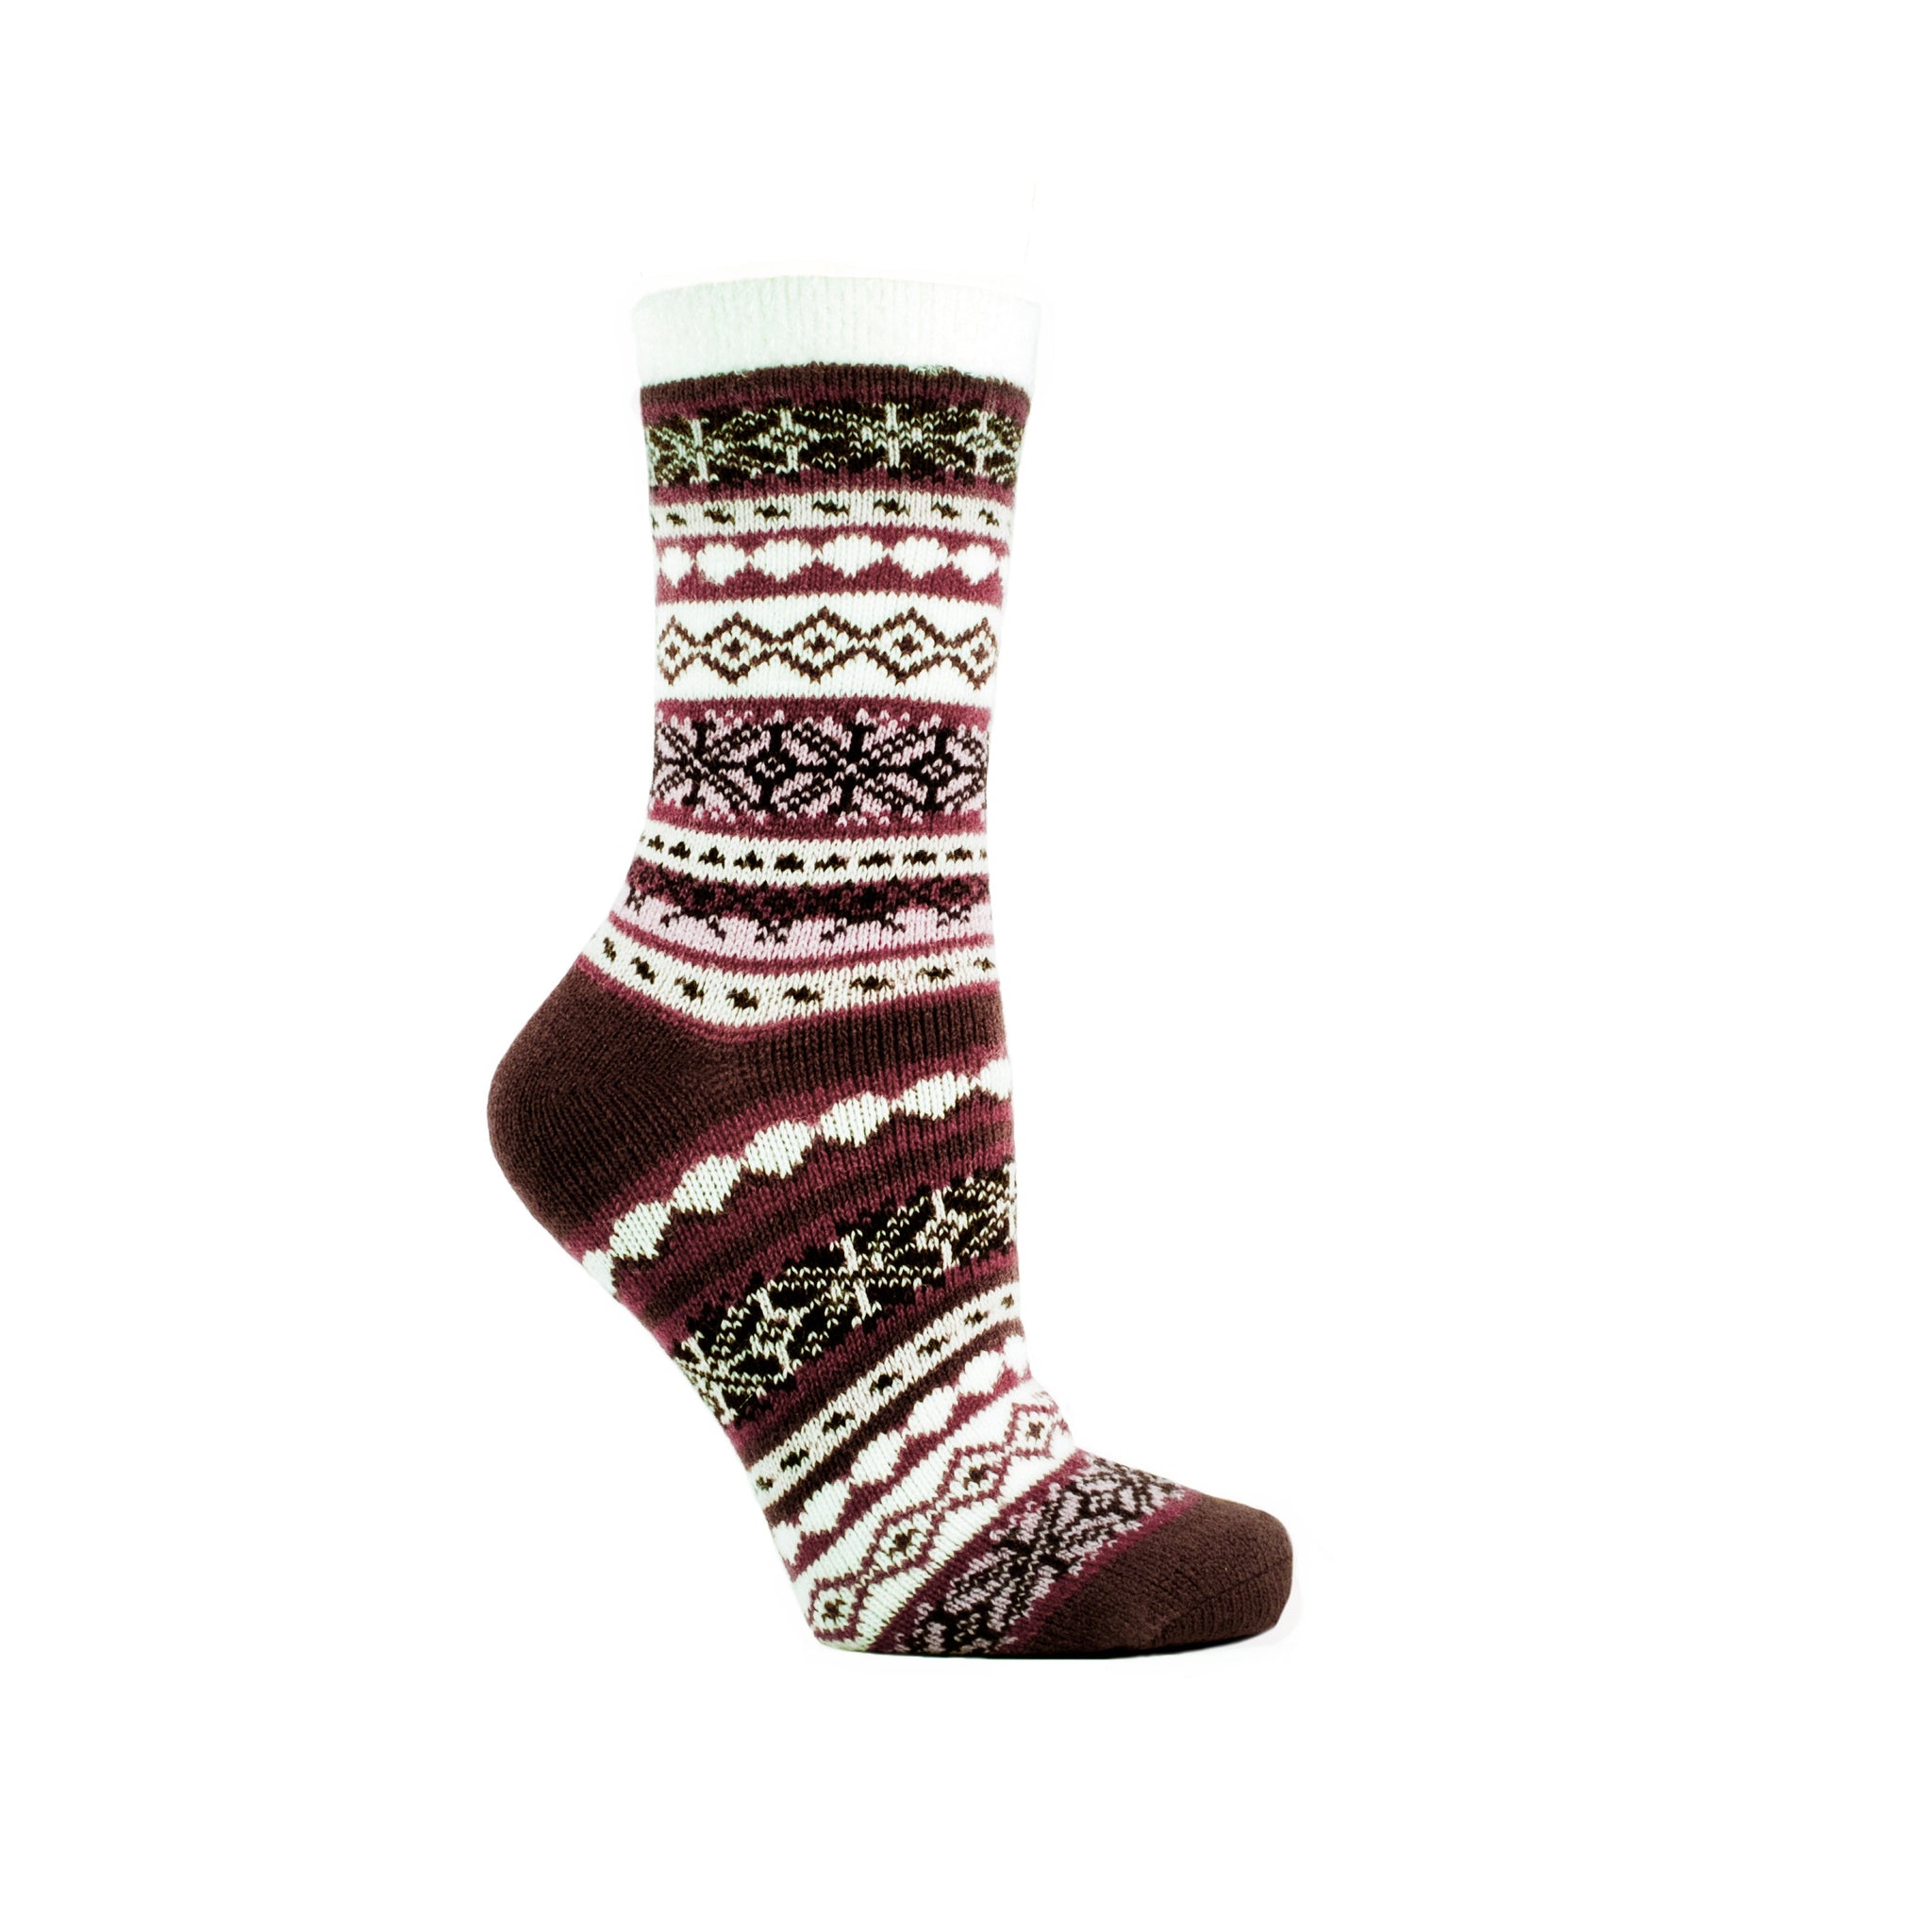 Women's Double Layer Corduroy Non-Skid Warm Soft and Fuzzy Lavender and Shea Butter Infused Slipper Socks Gift, Burgundy